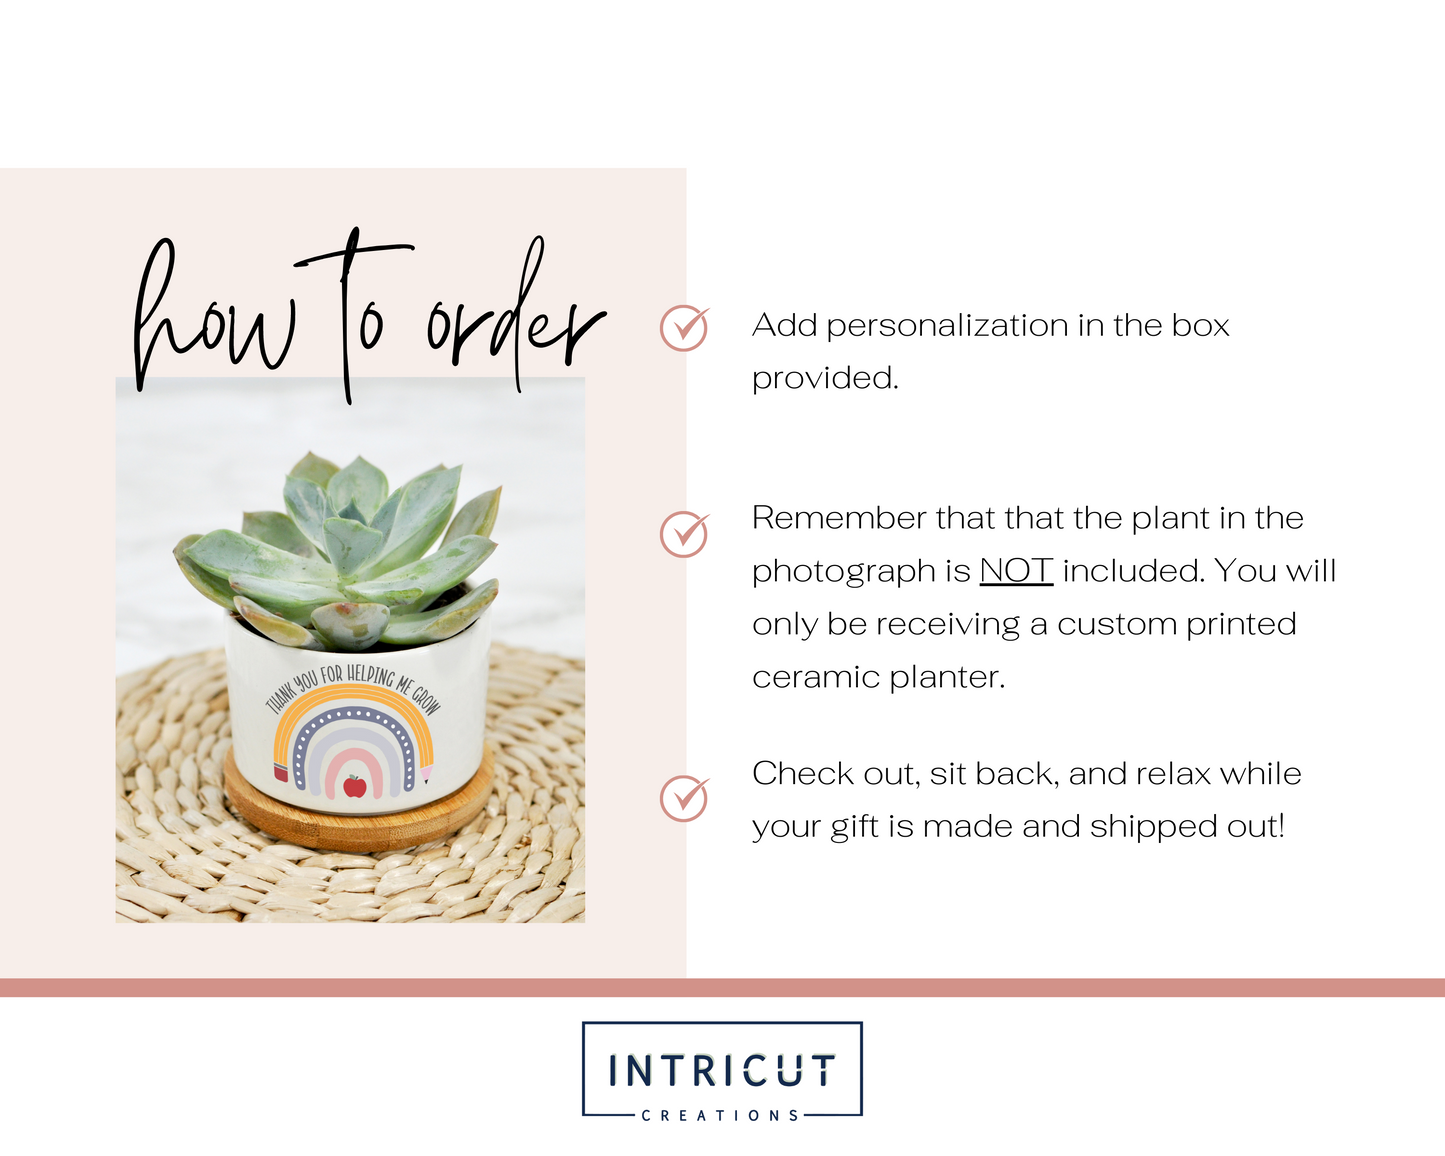 how to order: add your personalization, remember no plant is included, check out and wait for its arrival